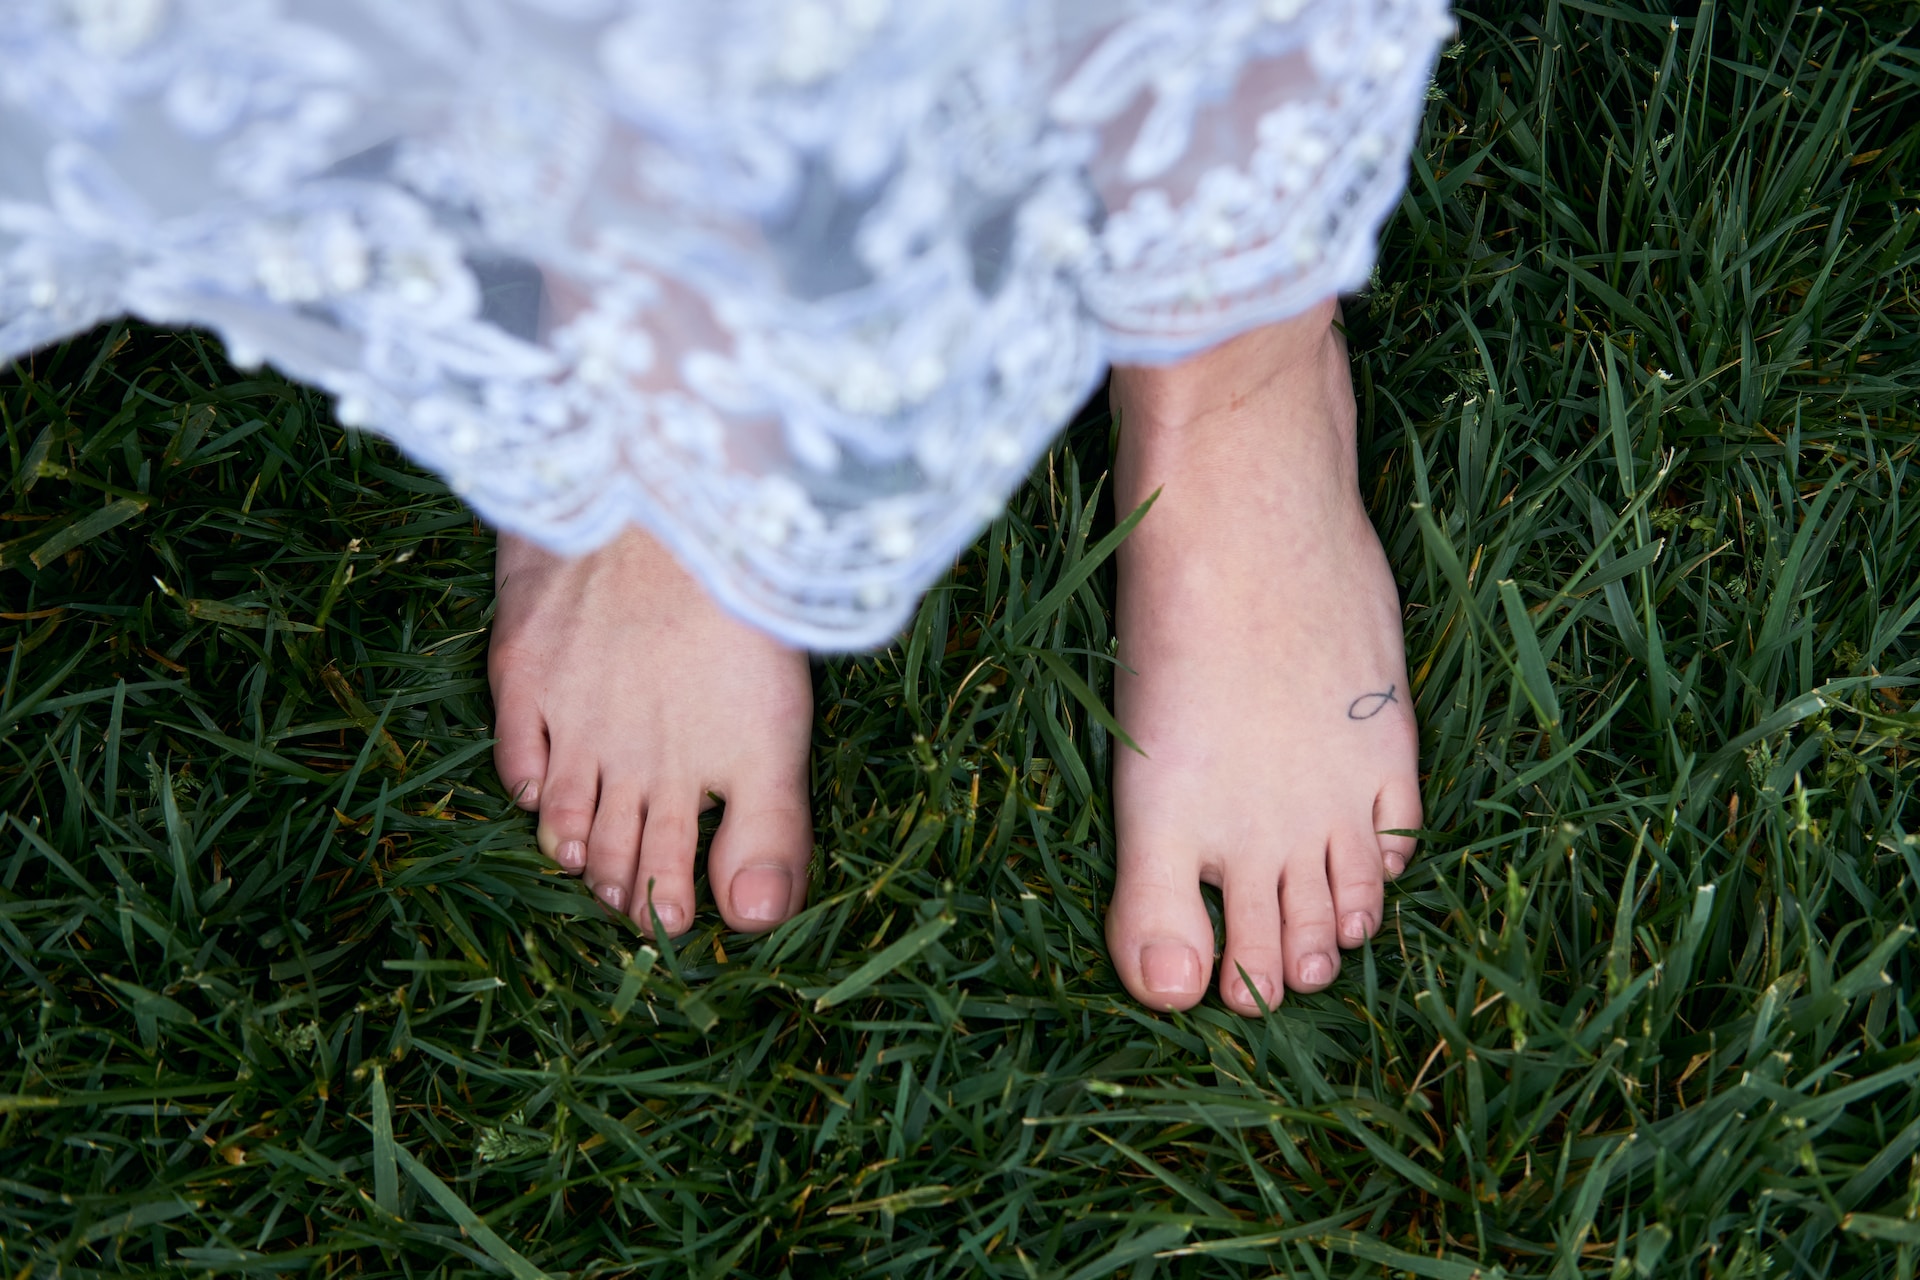 A person with white clothing standing barefoot on the grass.